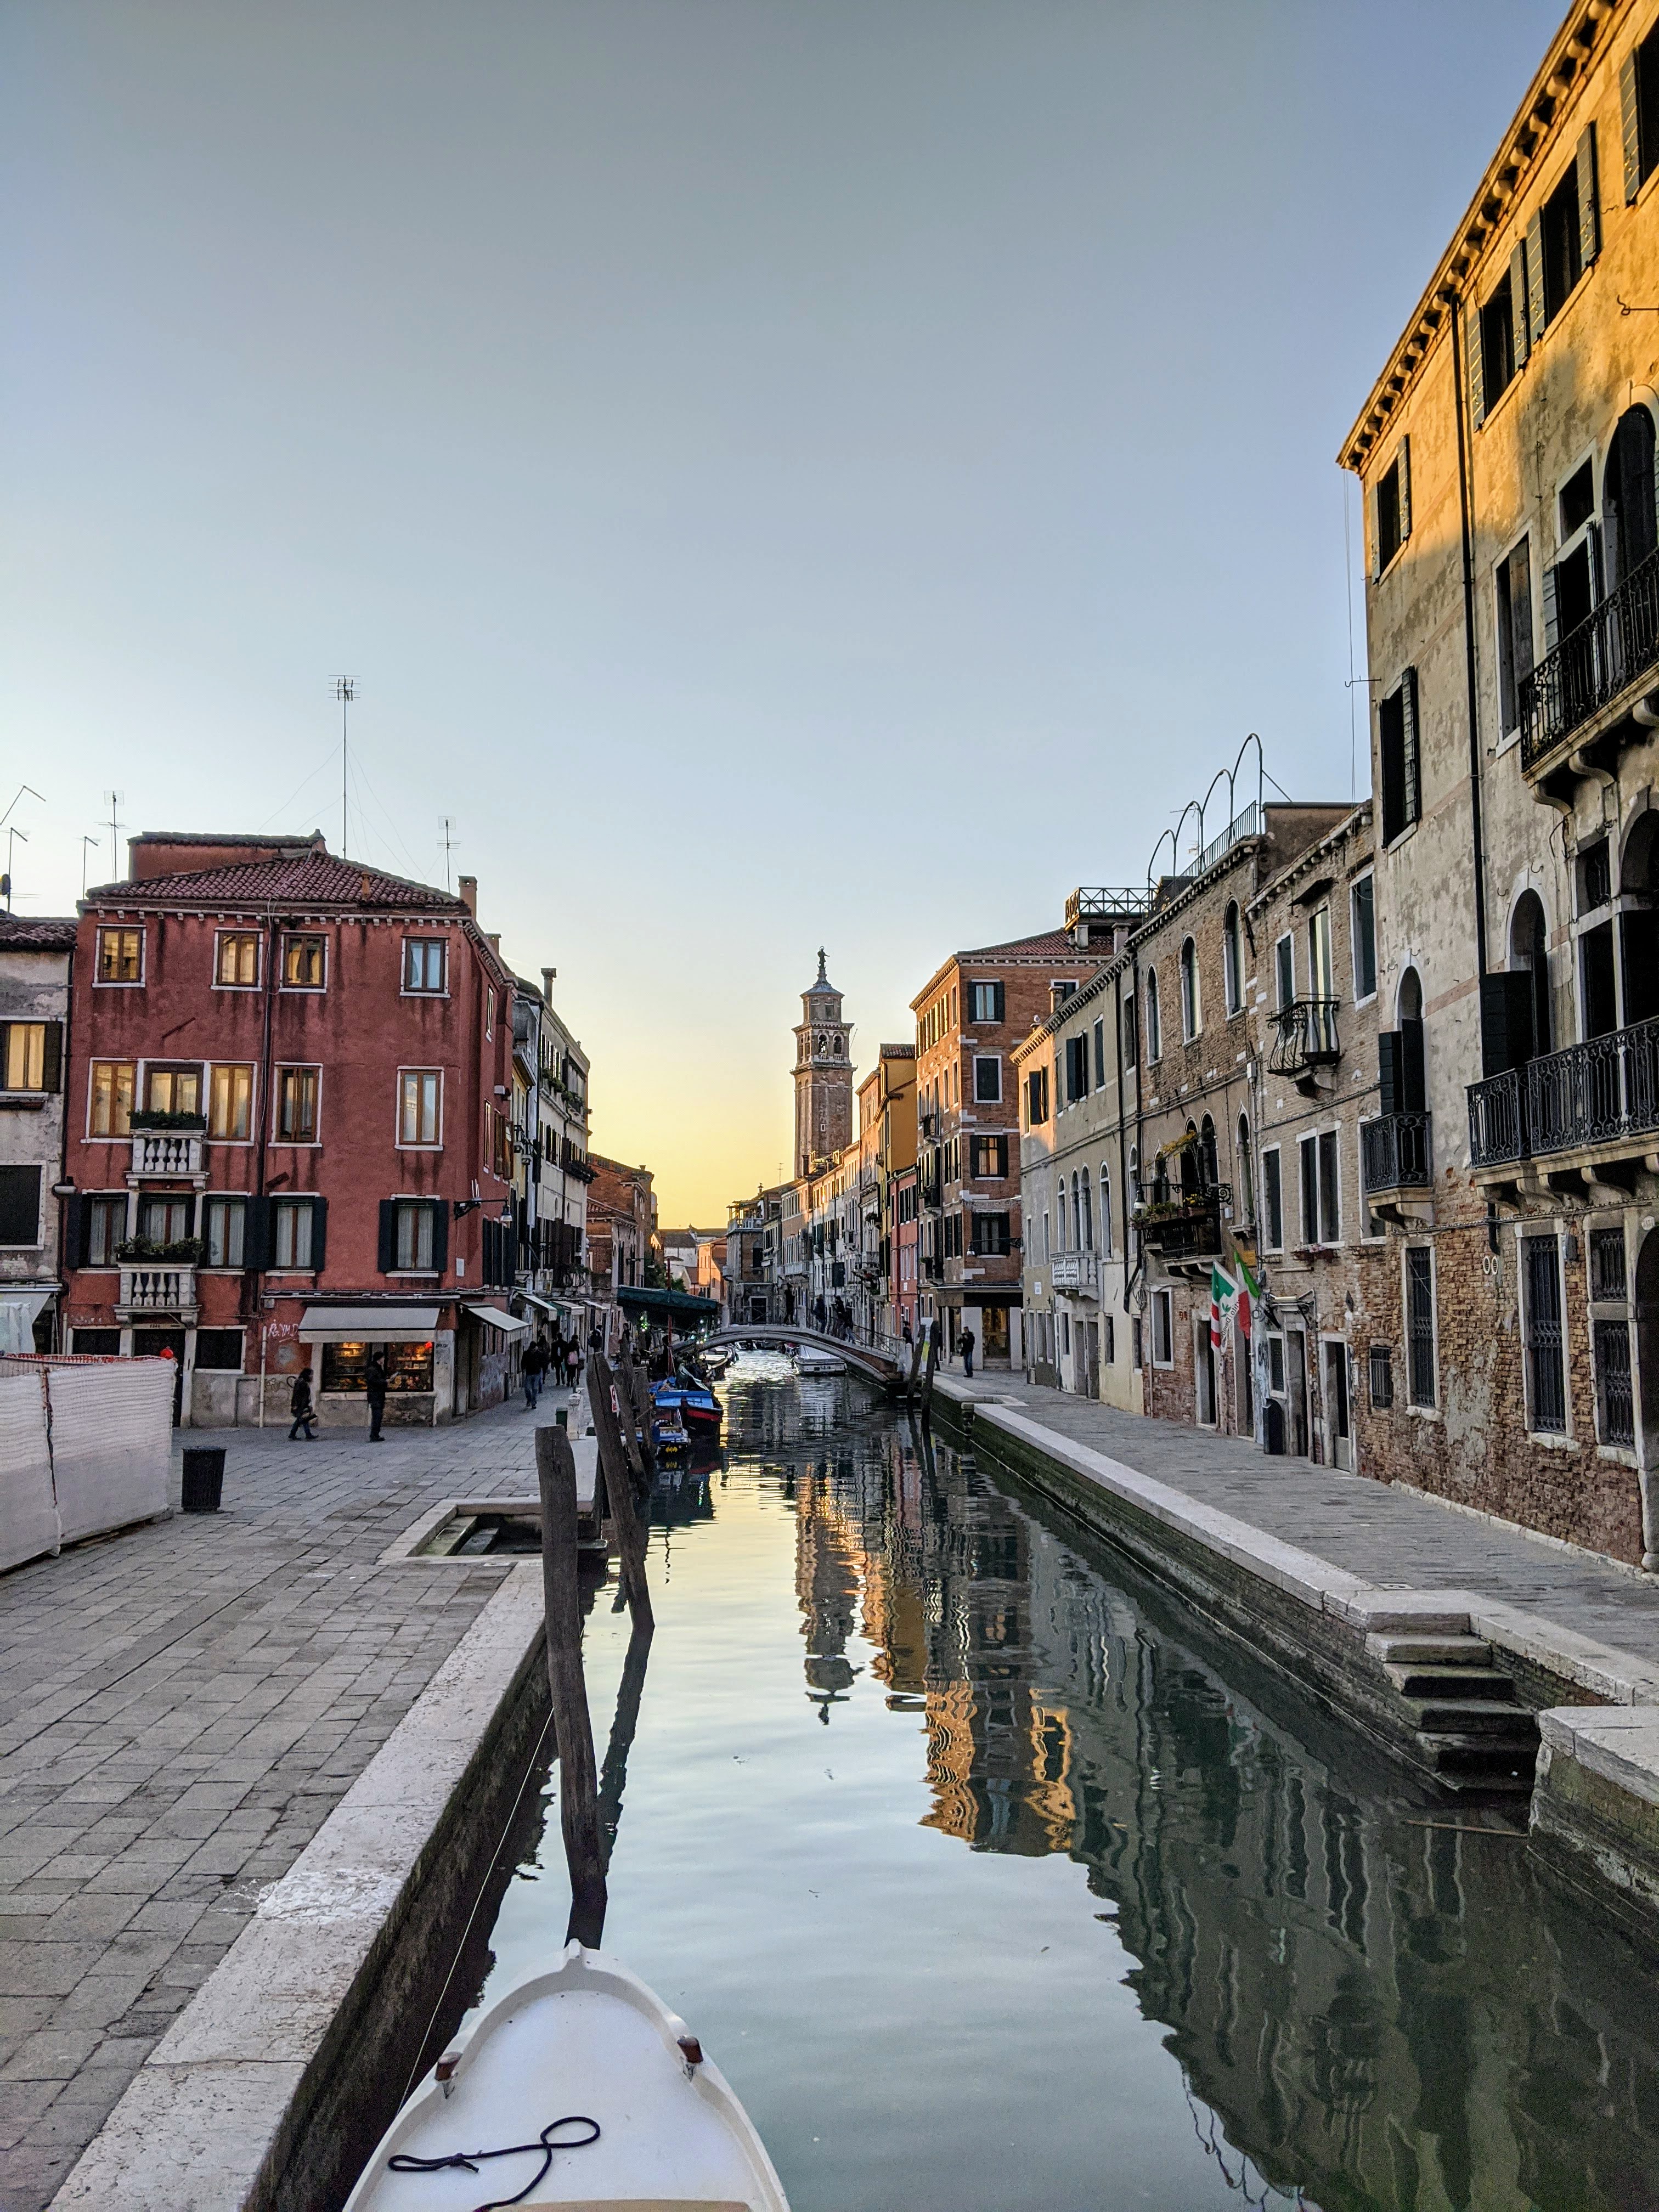 A Canal in Venice, Italy